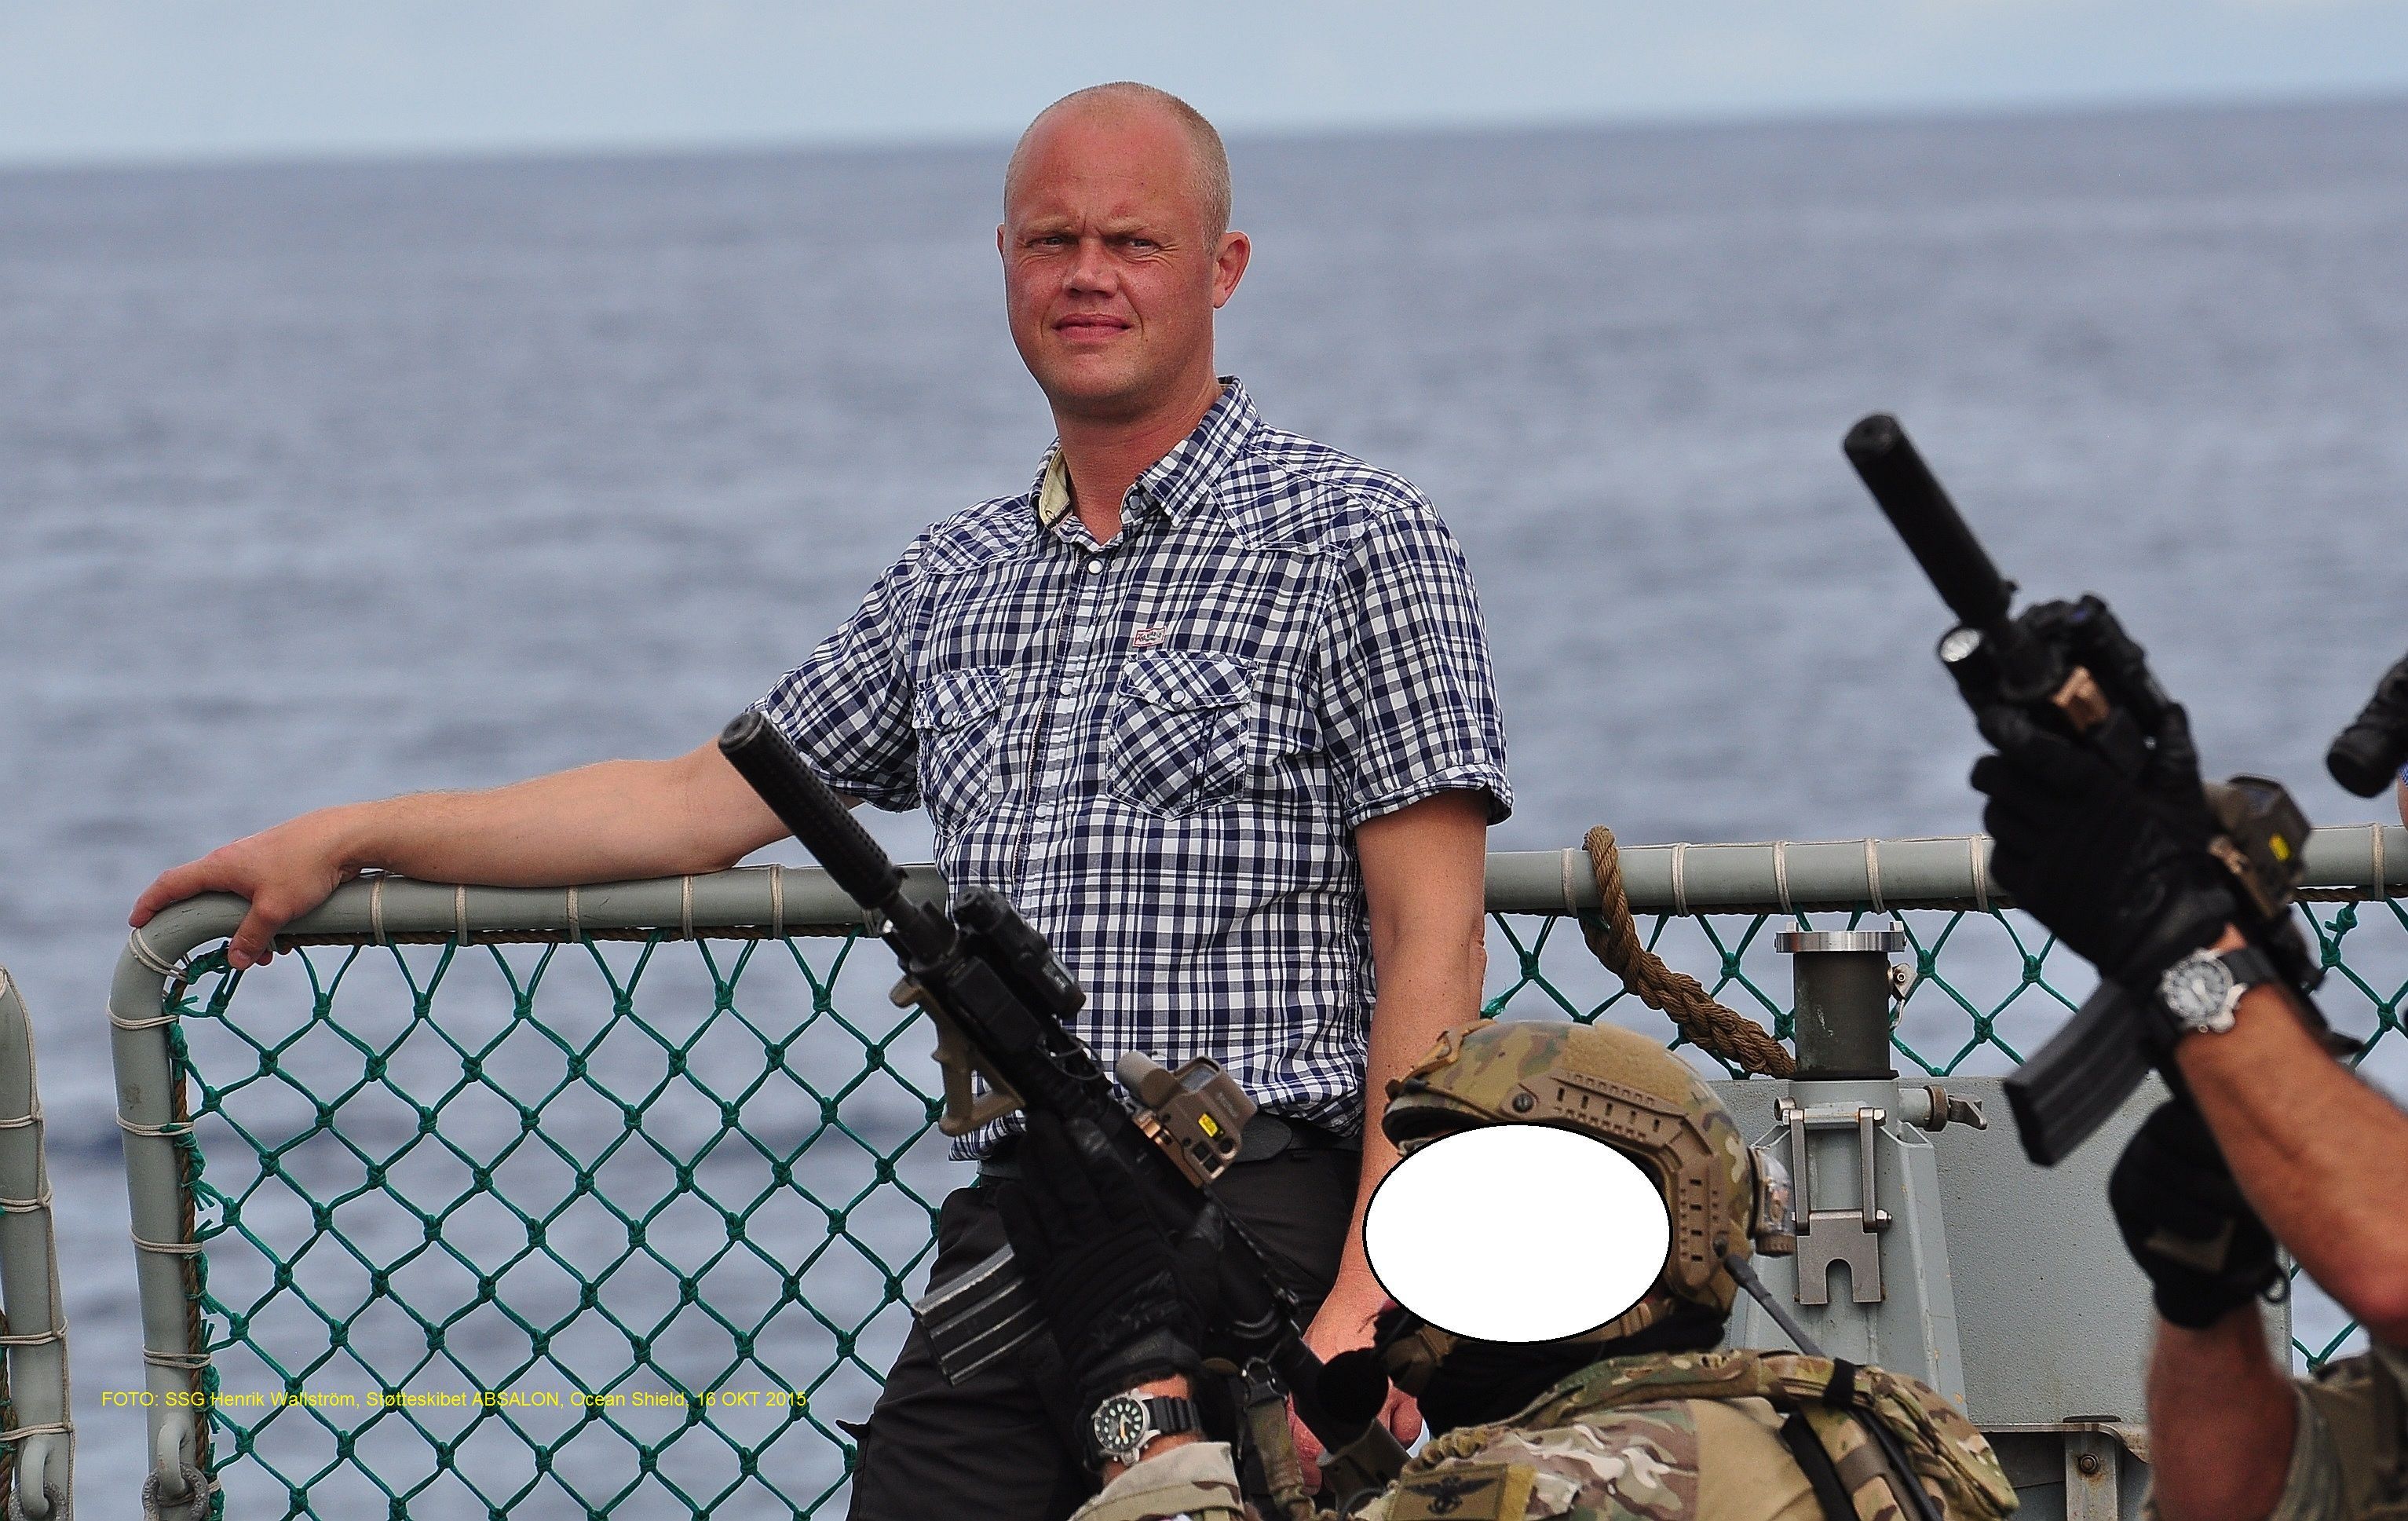 Defence minister takes in anti-piracy action off African coast